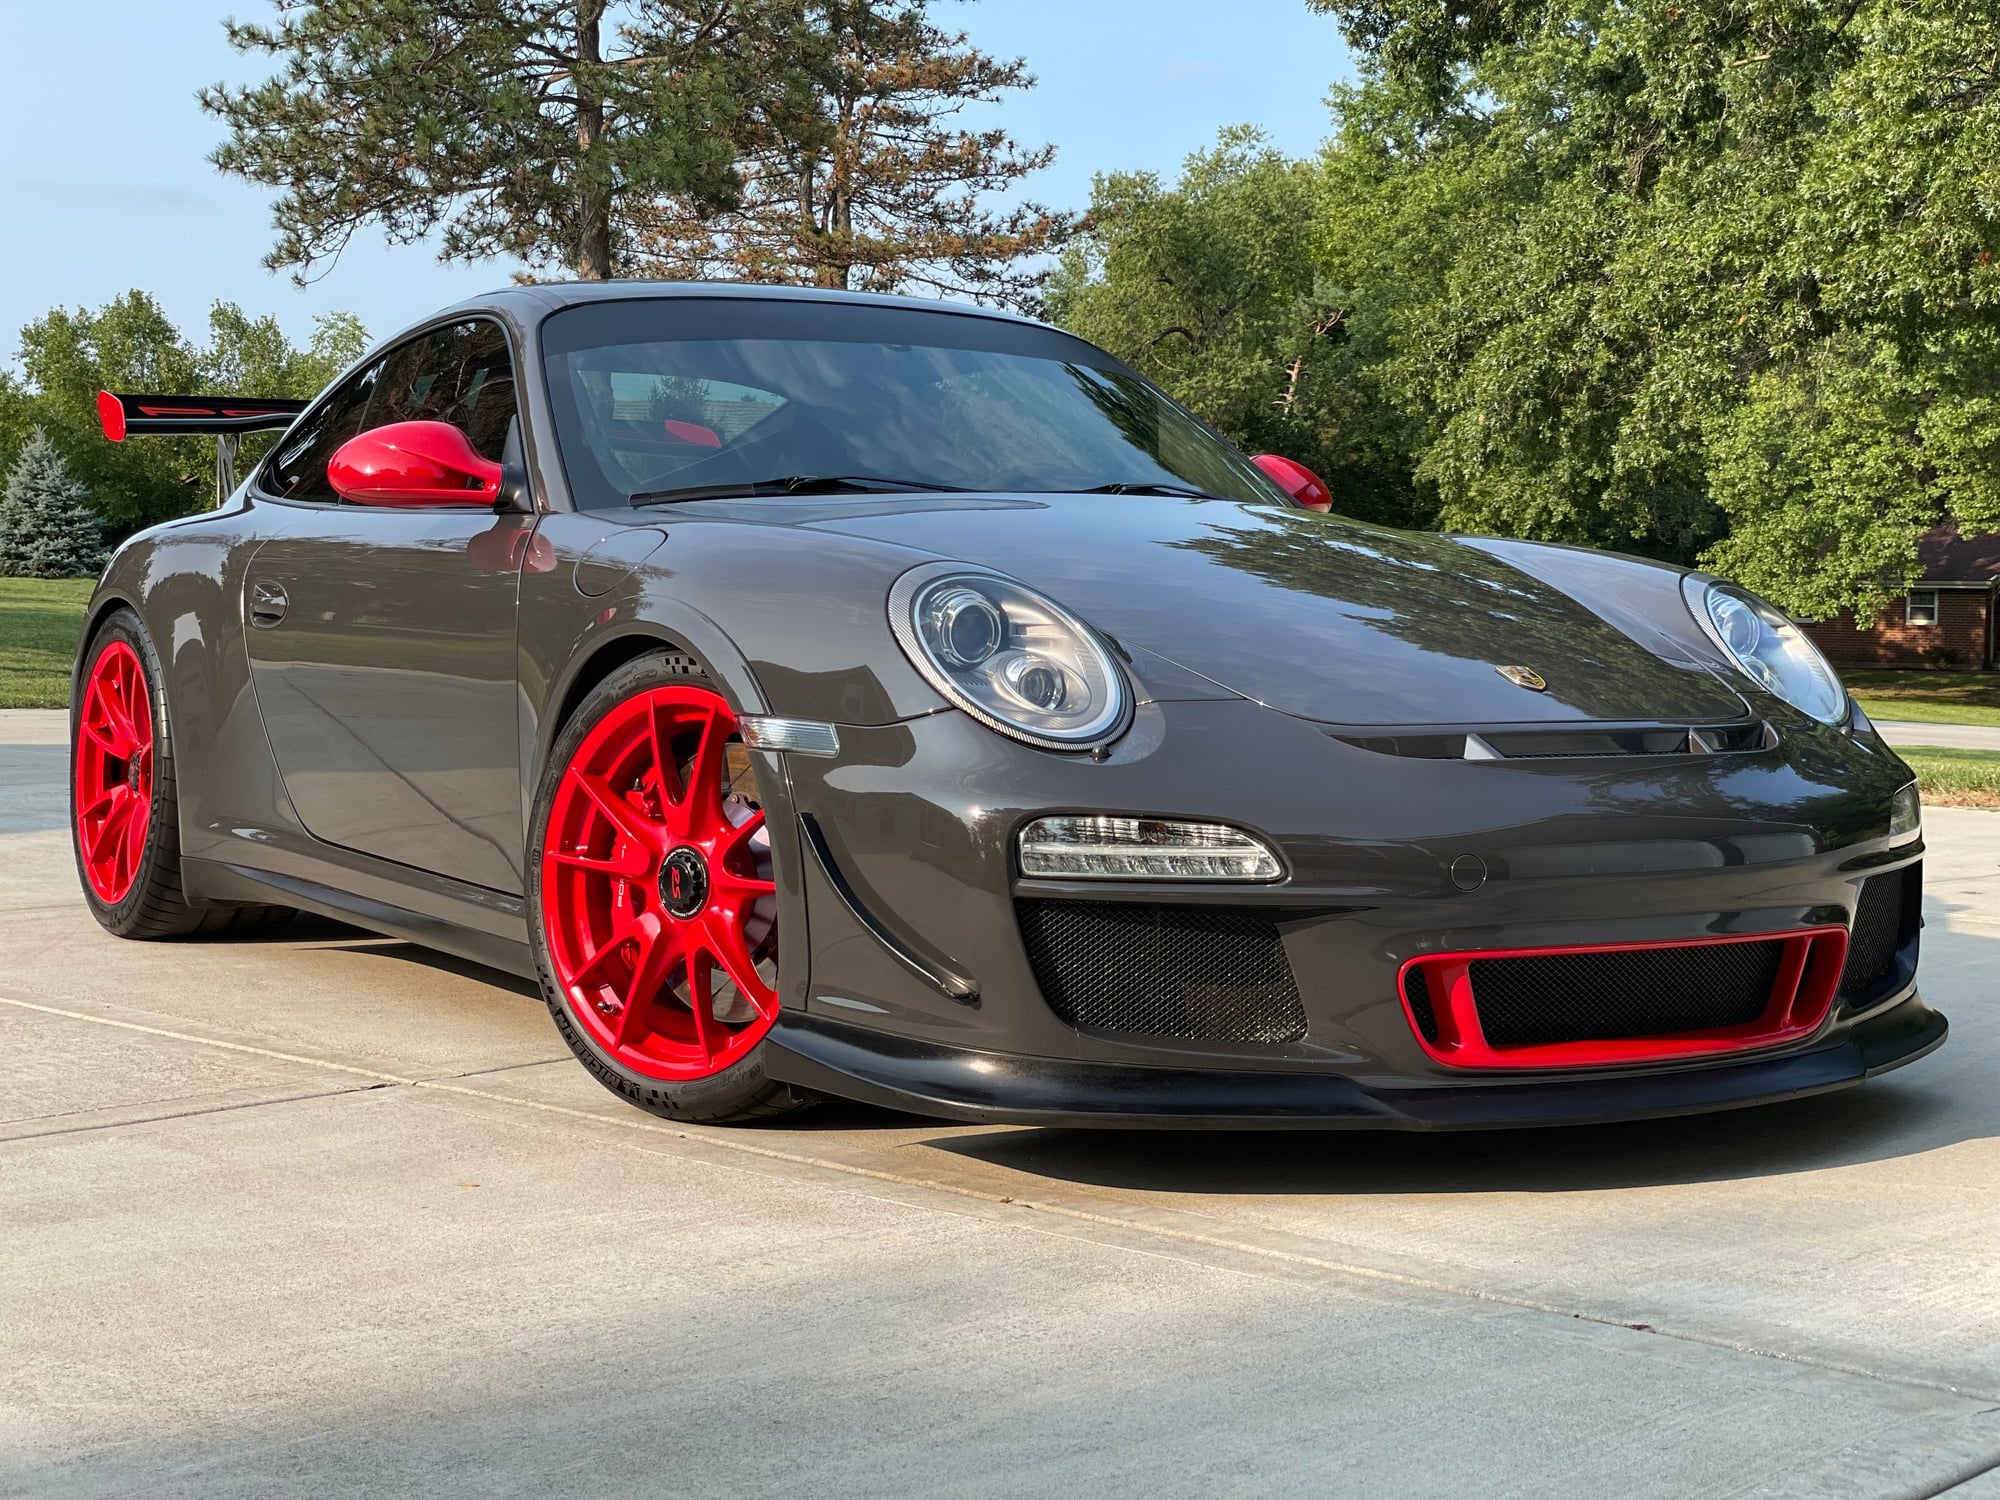 2011 Porsche 911 - SPECTACULAR TWO OWNER BLACK/GRAY 2011 PORSCHE 911 GT3RS - Used - VIN WP0AC2A96BS783336 - 25,332 Miles - 6 cyl - 2WD - Manual - Coupe - Black - Olathe, KS 66062, United States